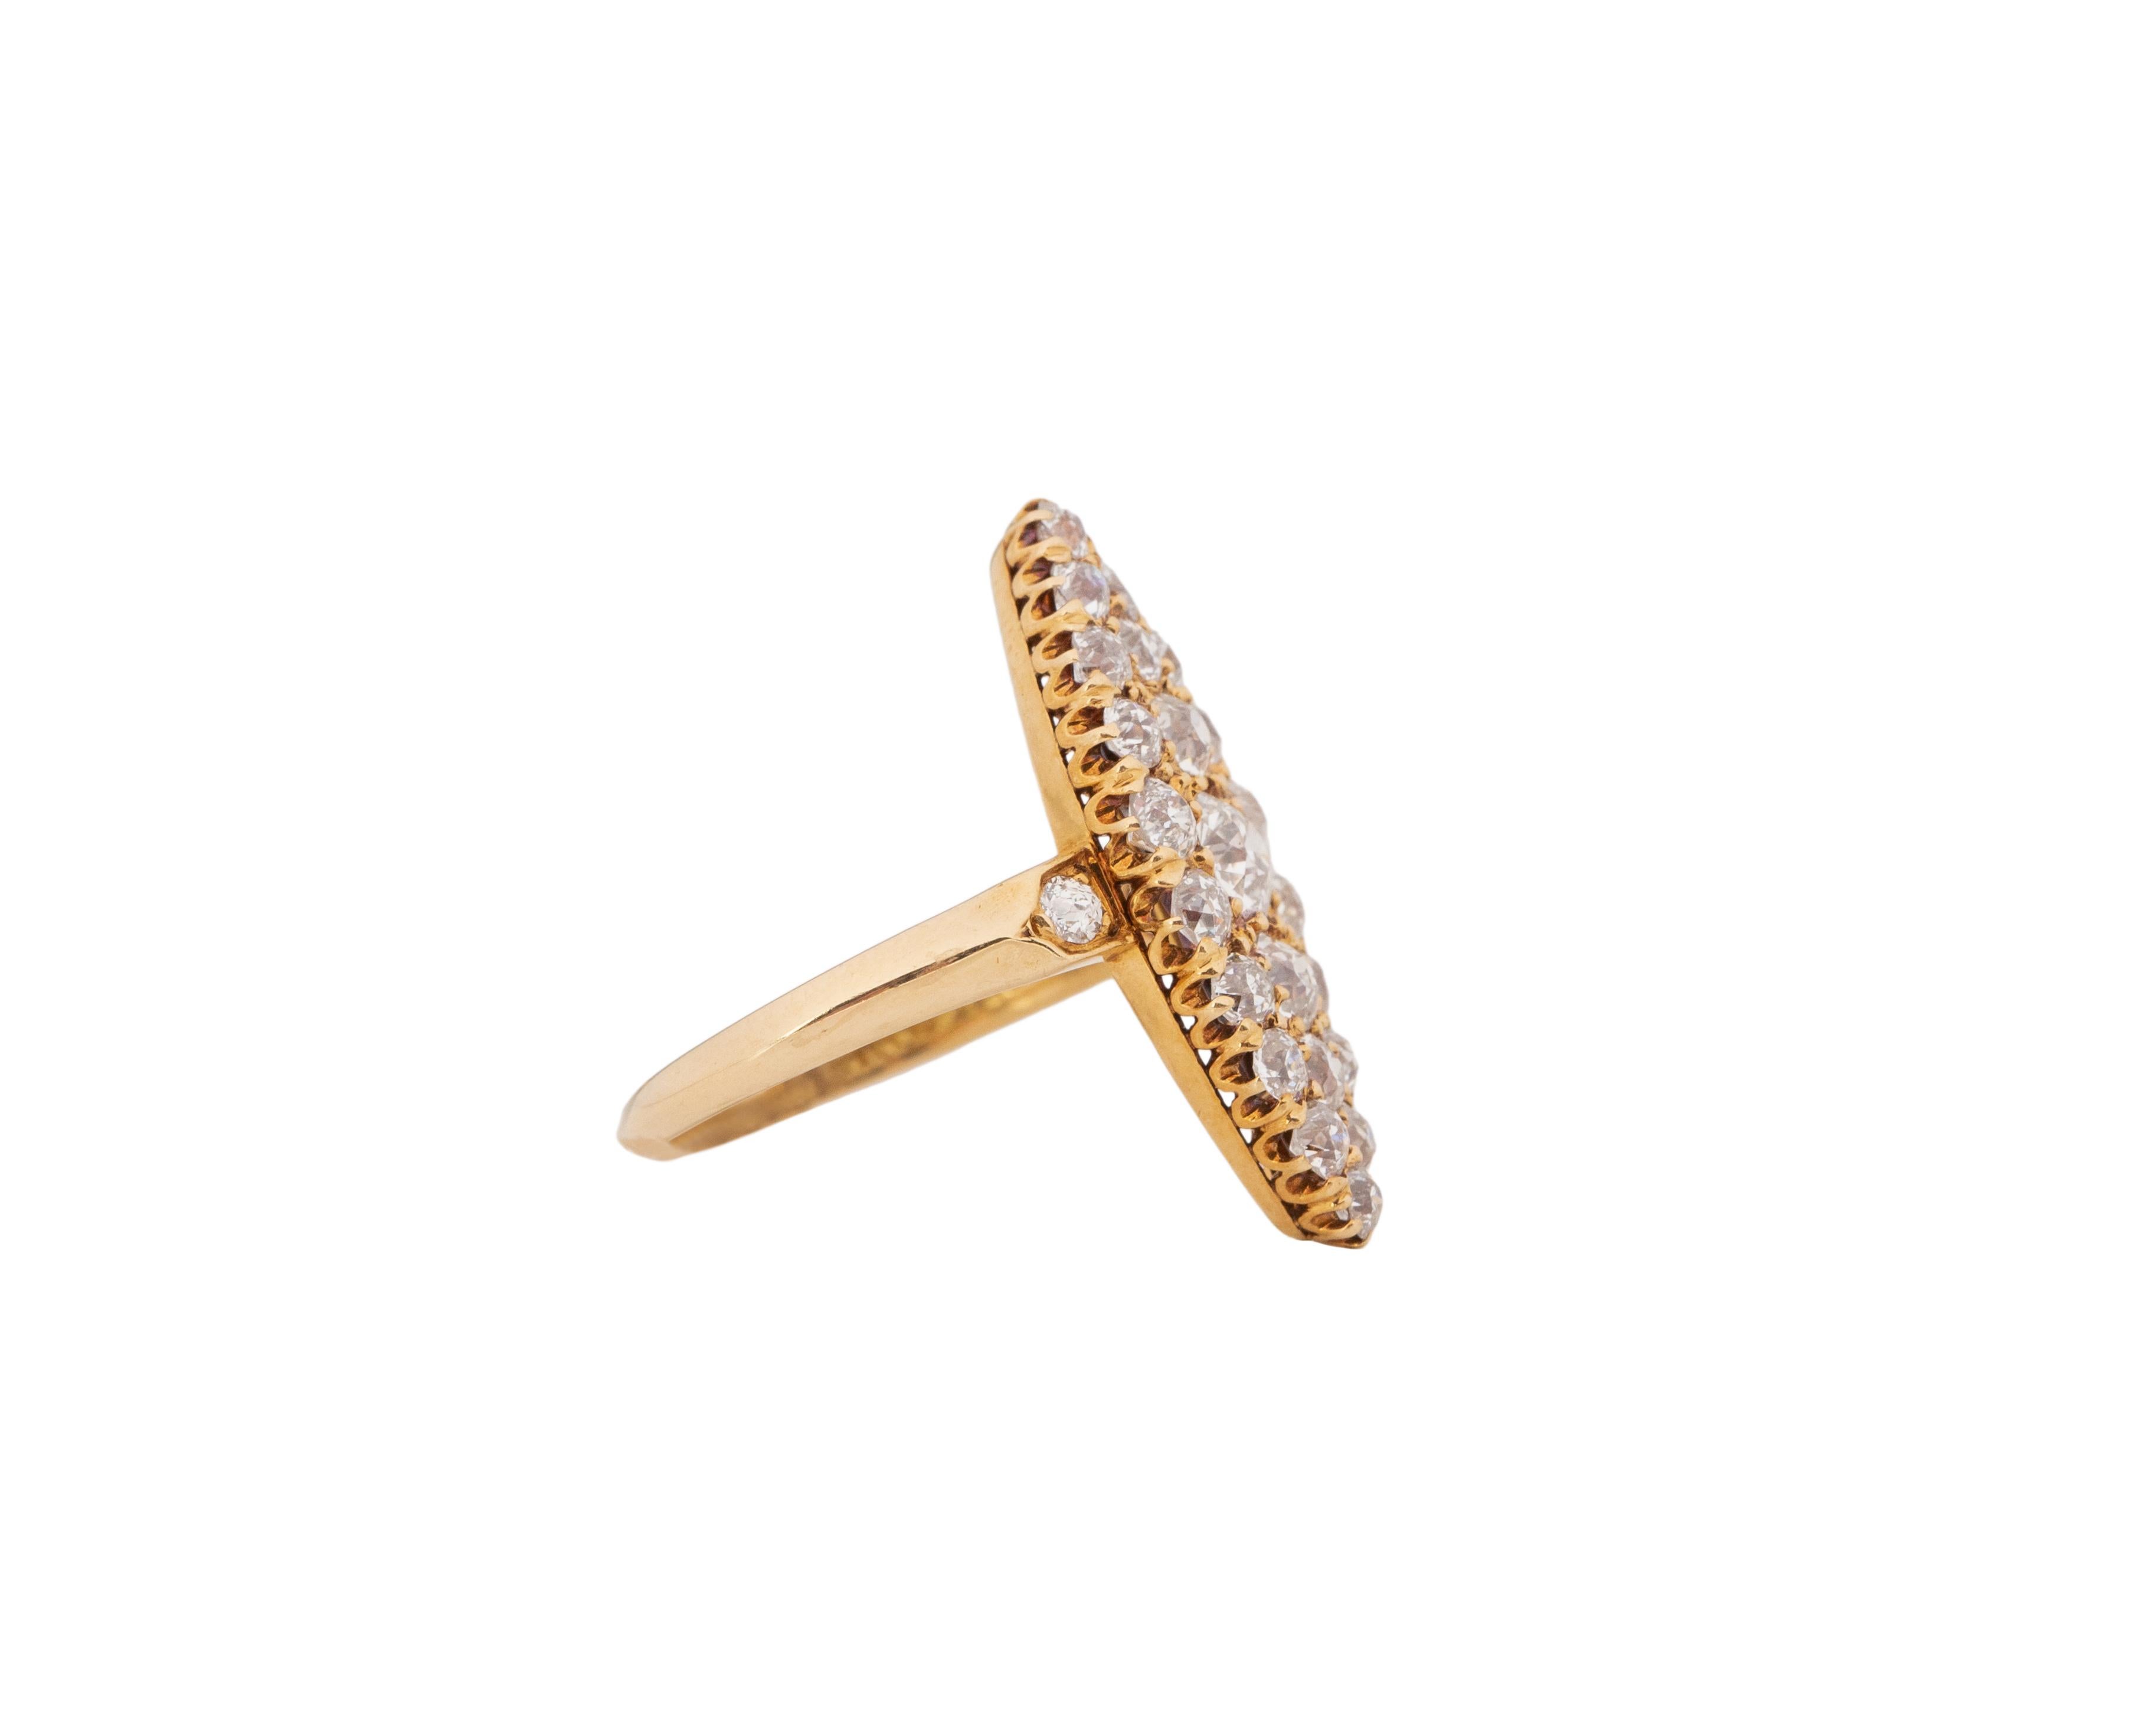 Ring Size: 4.25
Metal Type: 18k Yellow Gold [Hallmarked, and Tested]
Weight: 3.5 grams

Diamond Details:
Weight: 1.00ct, total weight
Cut: Old European brilliant
Color: F
Clarity: VS

Finger to Top of Stone Measurement: 2mm
Condition: Excellent